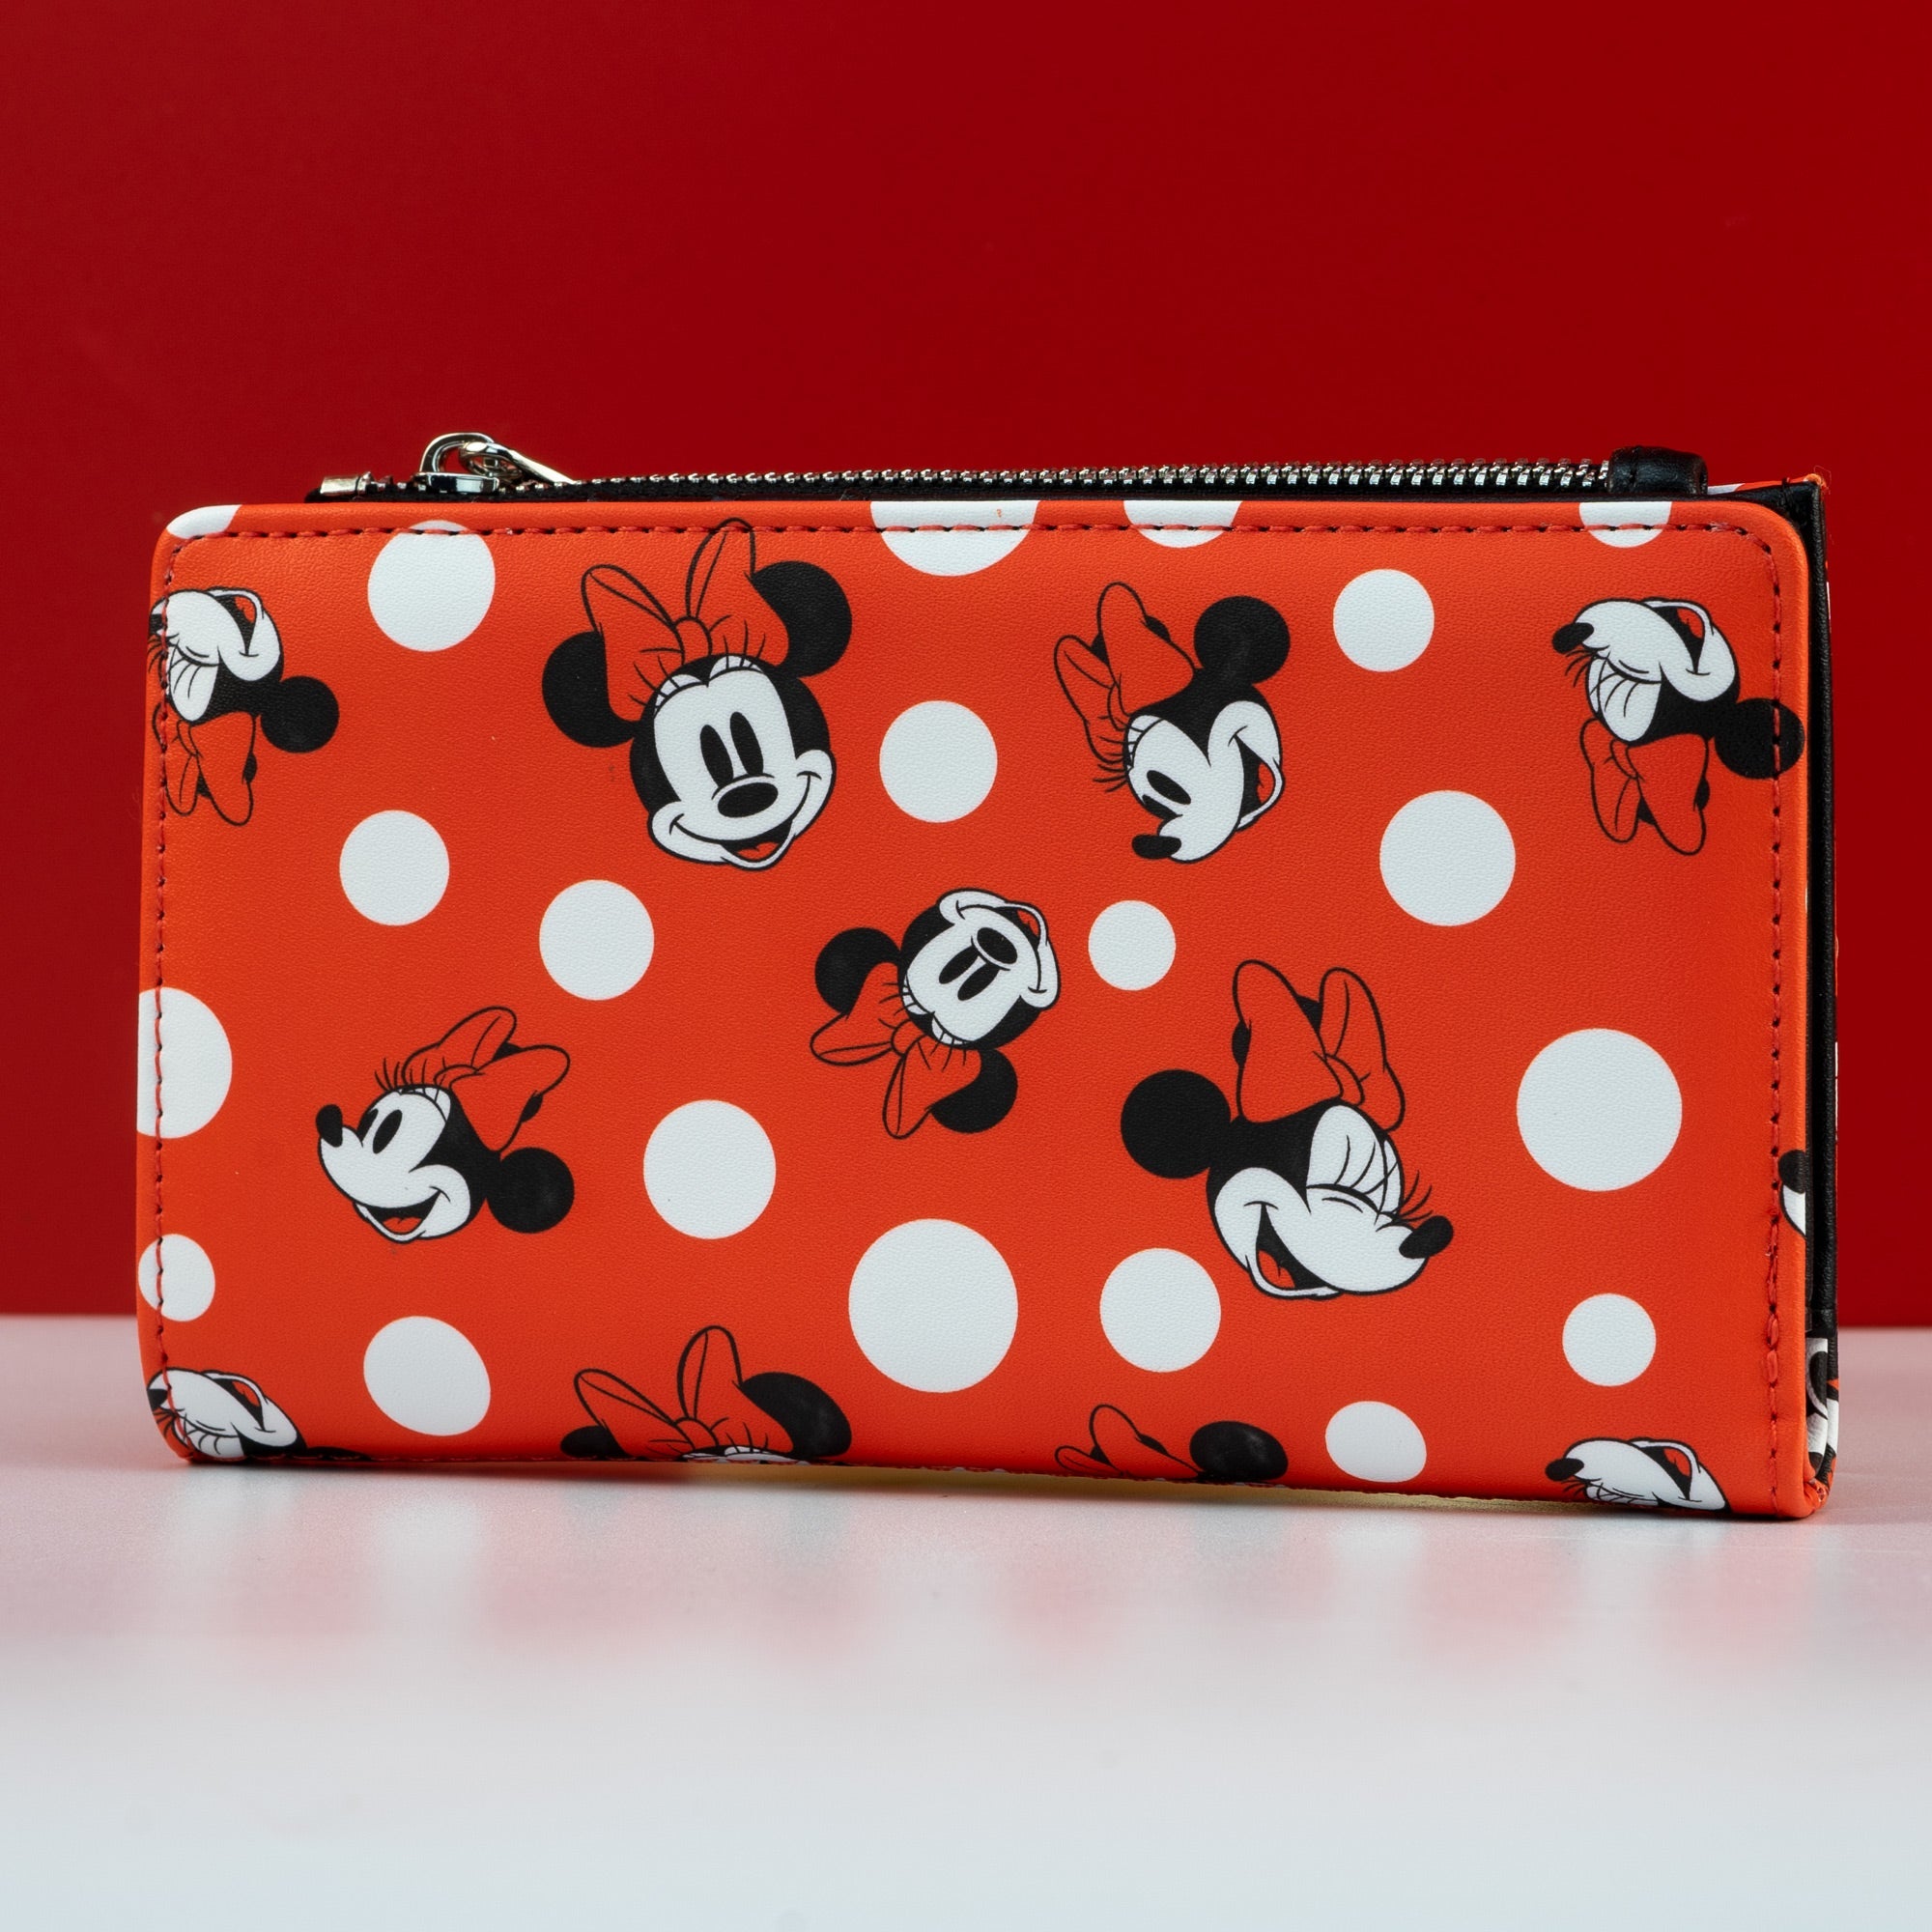 Loungefly x Disney Minnie Mouse Red Polka Dot AOP Purse - GeekCore